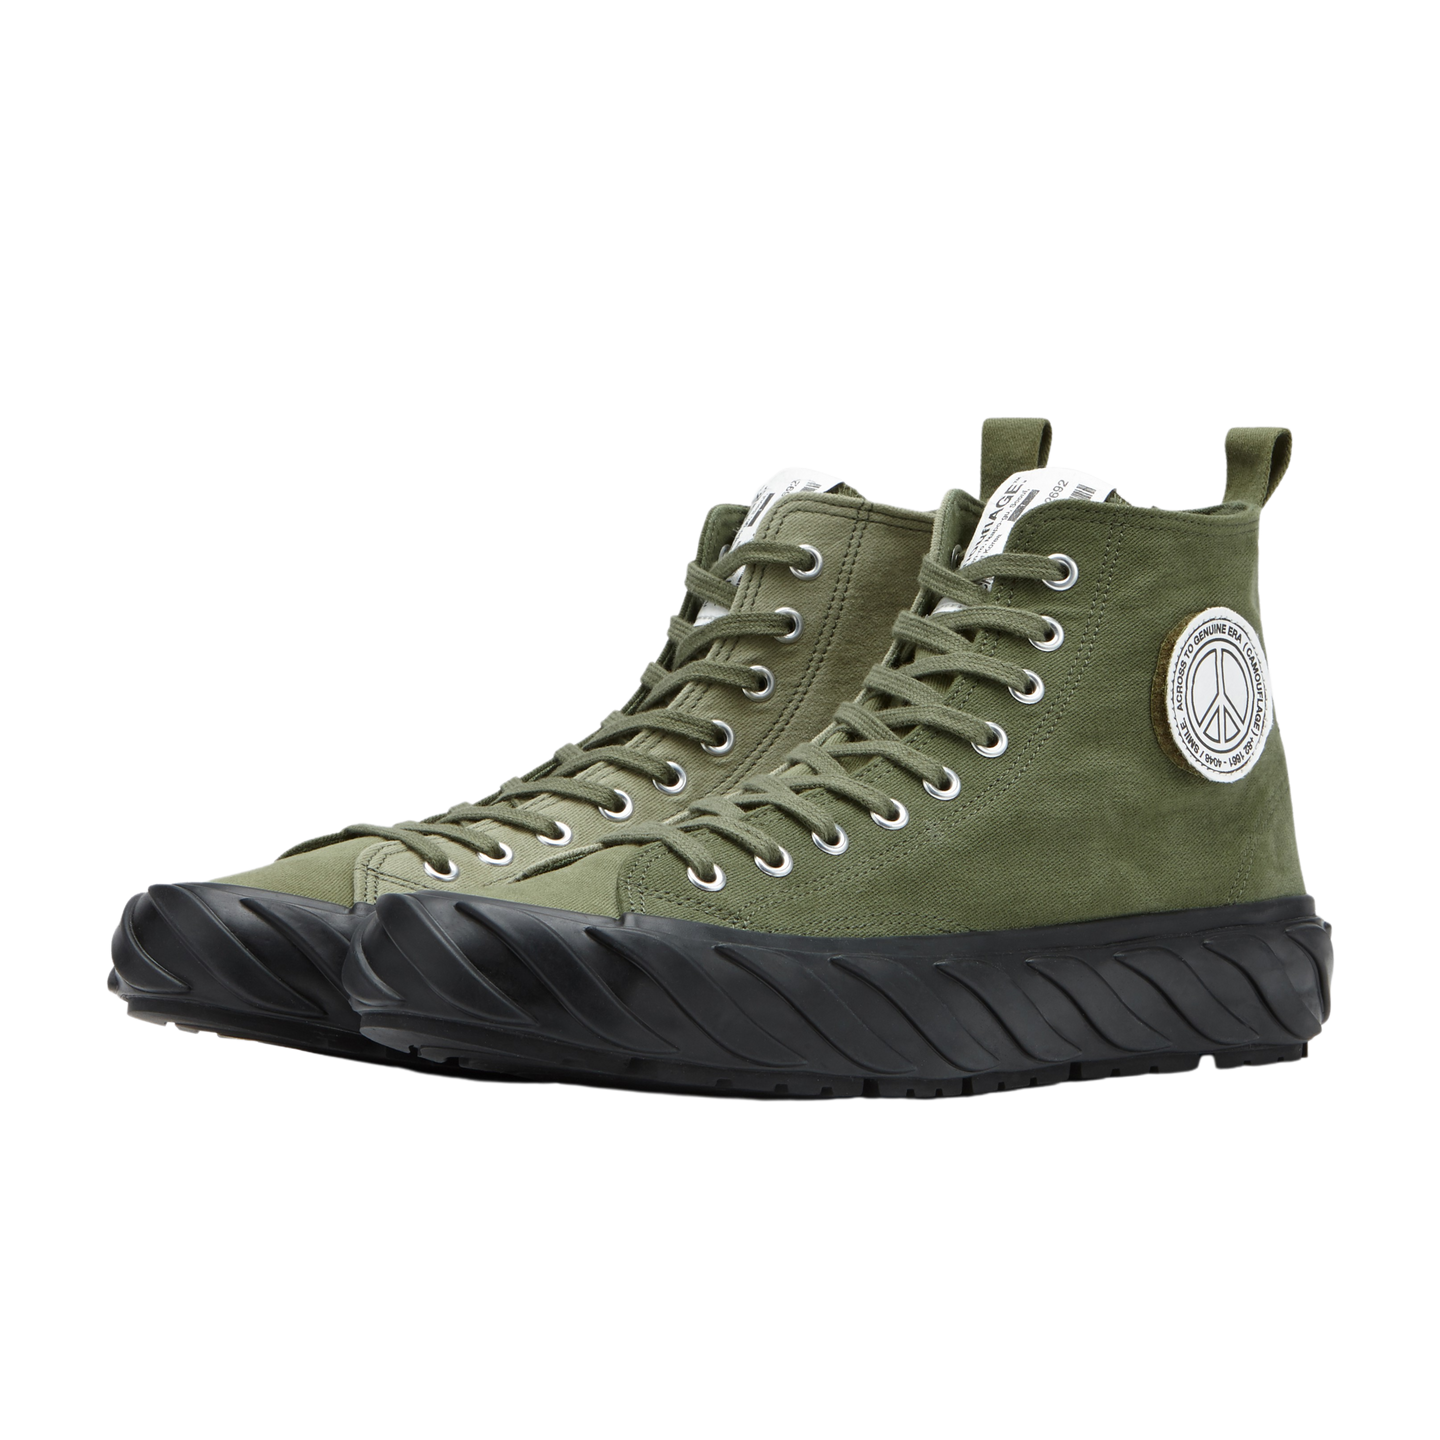 AGE SNEAKERS Top Camouflage Field Cargo